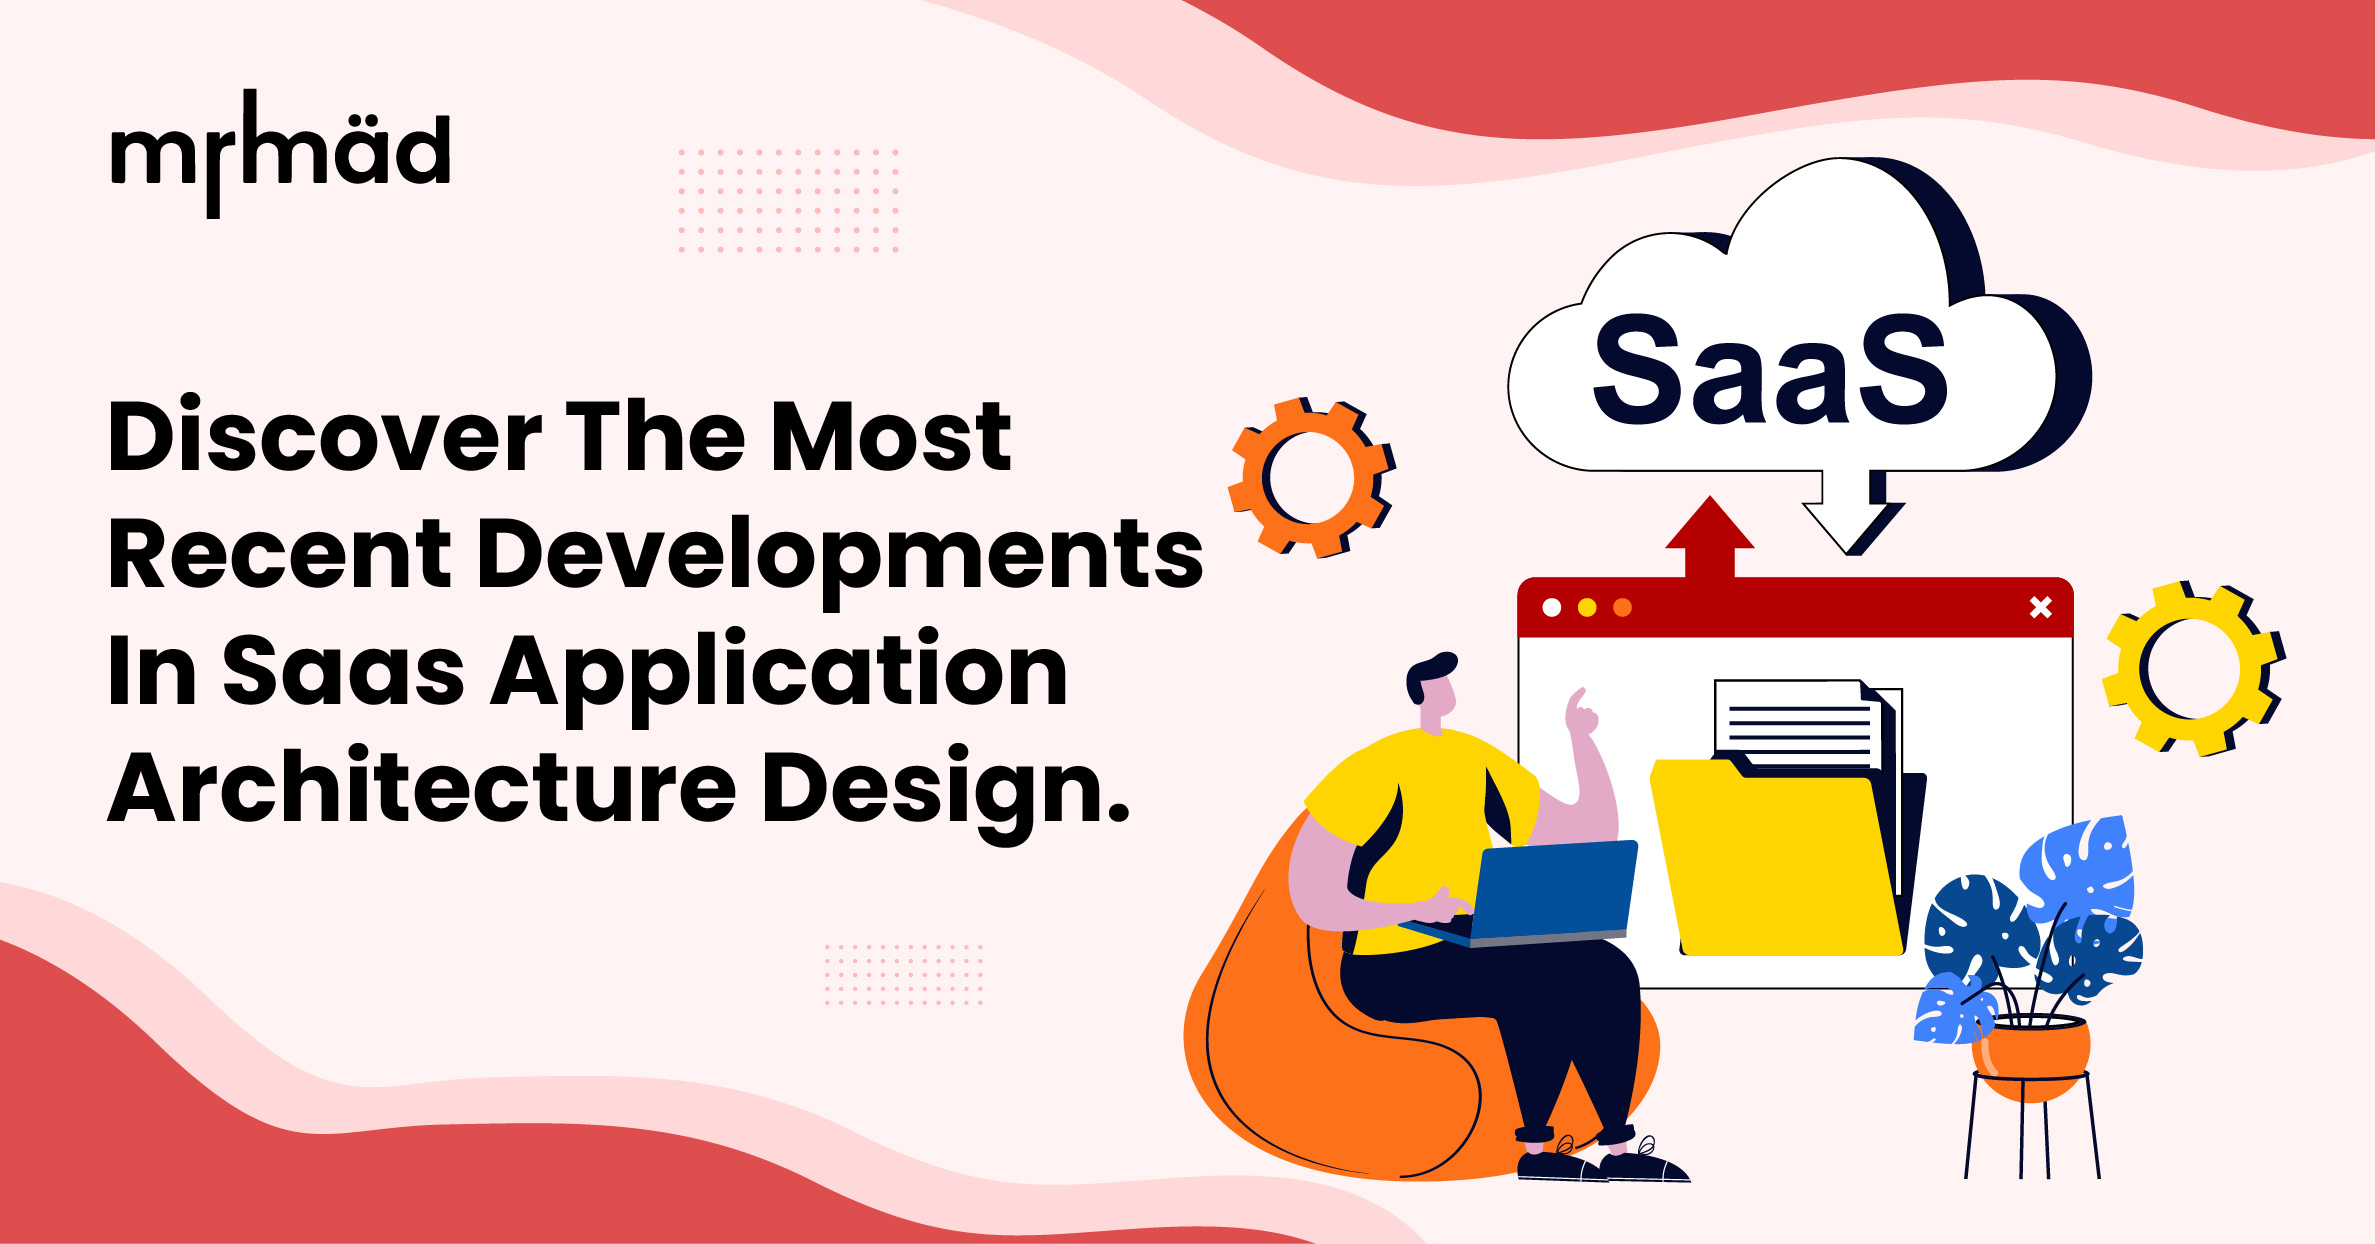 Discover the most recent developments in SaaS application architecture design